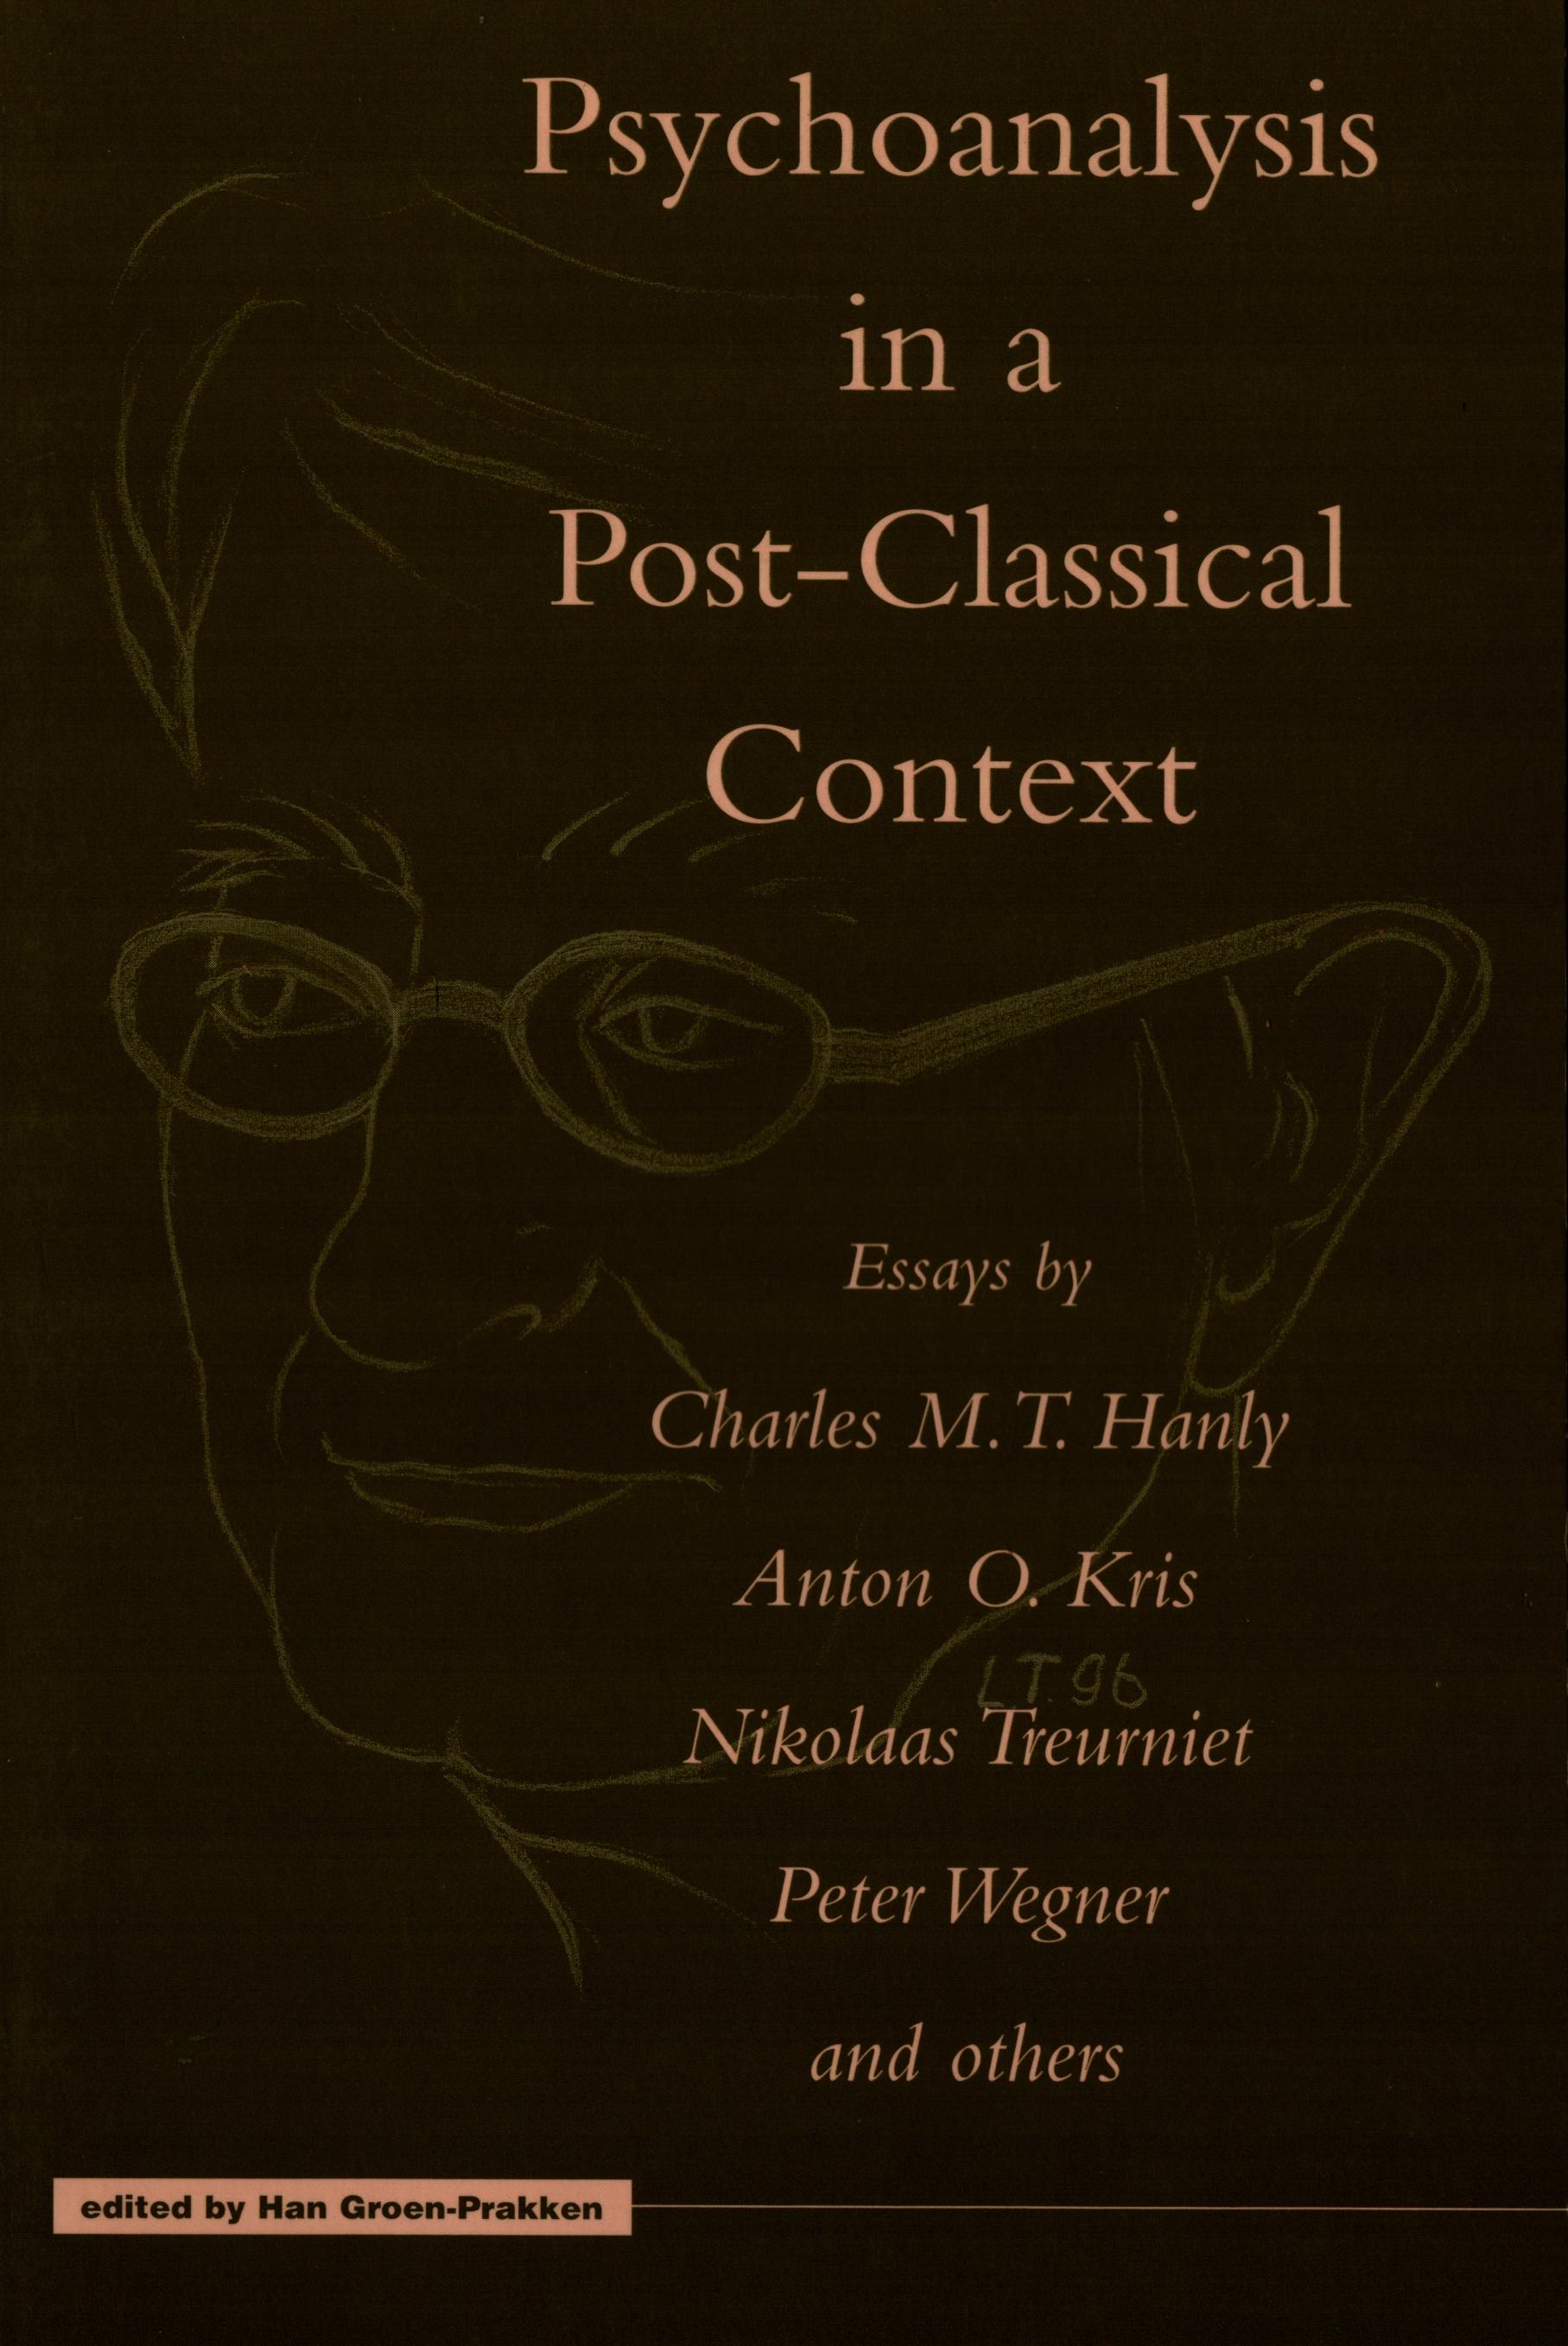 Psychoanalysis in a Post-Classical Context